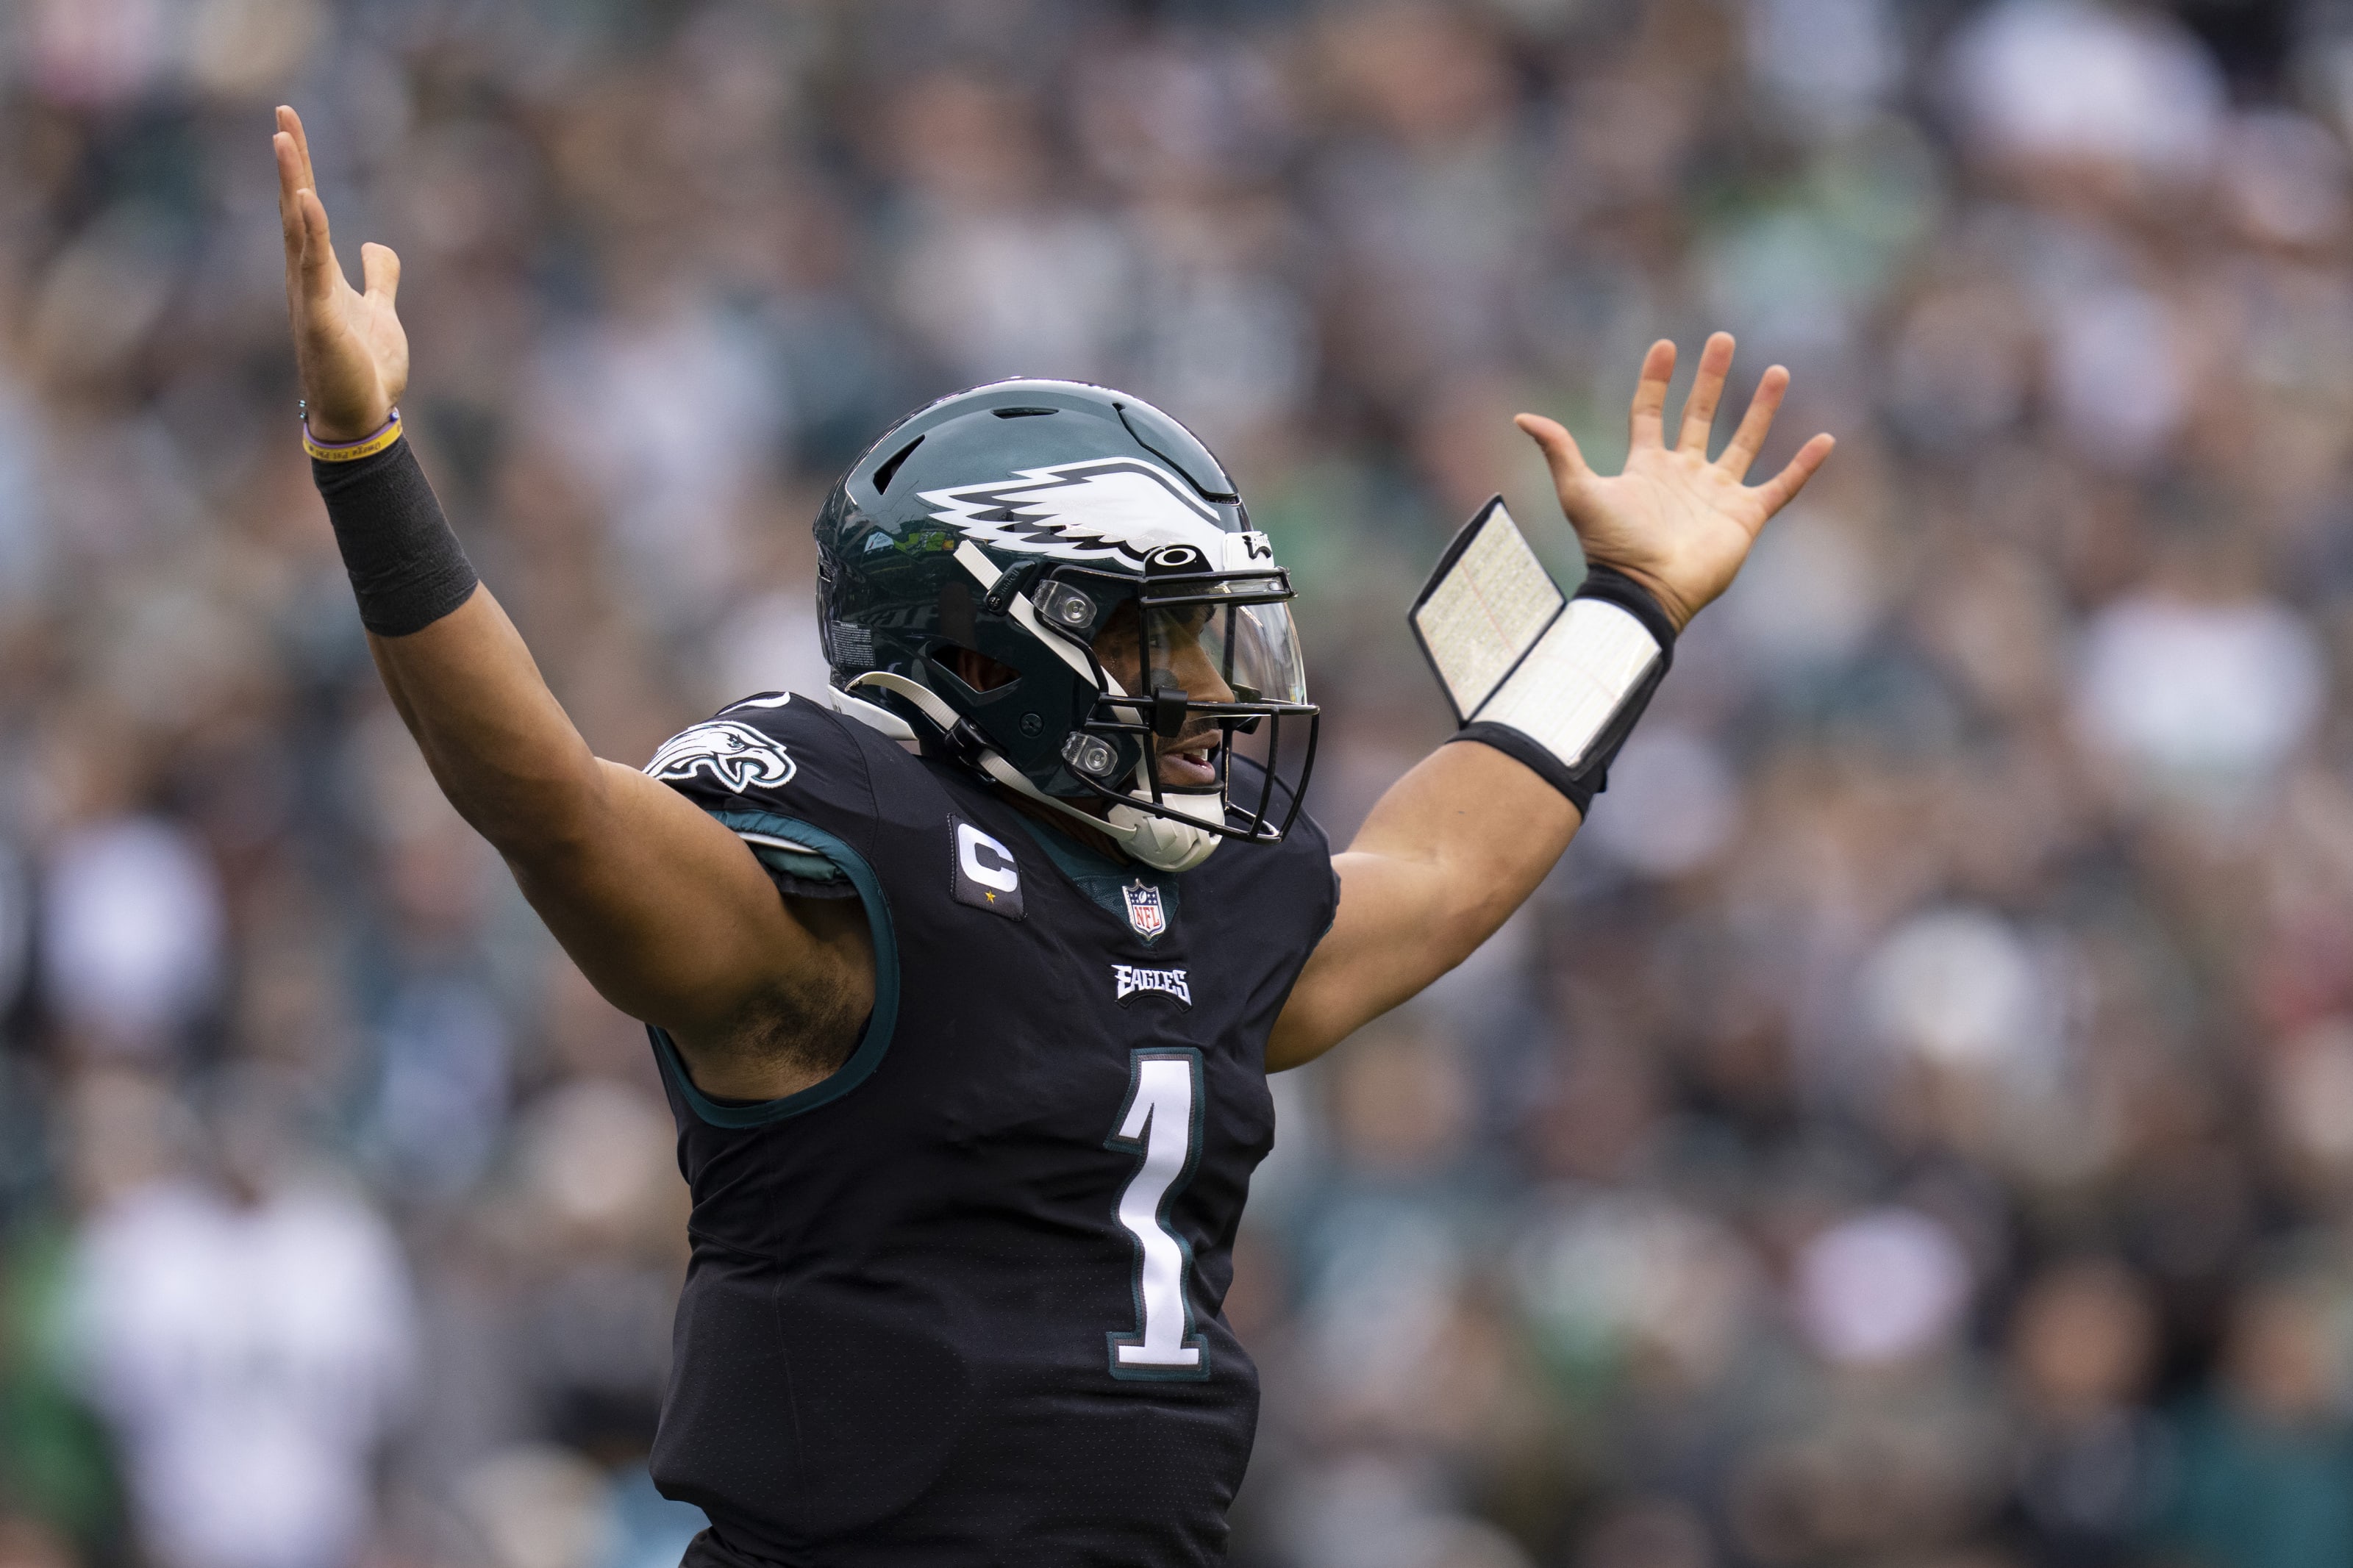 Top 3 Eagles storylines as divisional clash versus Giants approaches